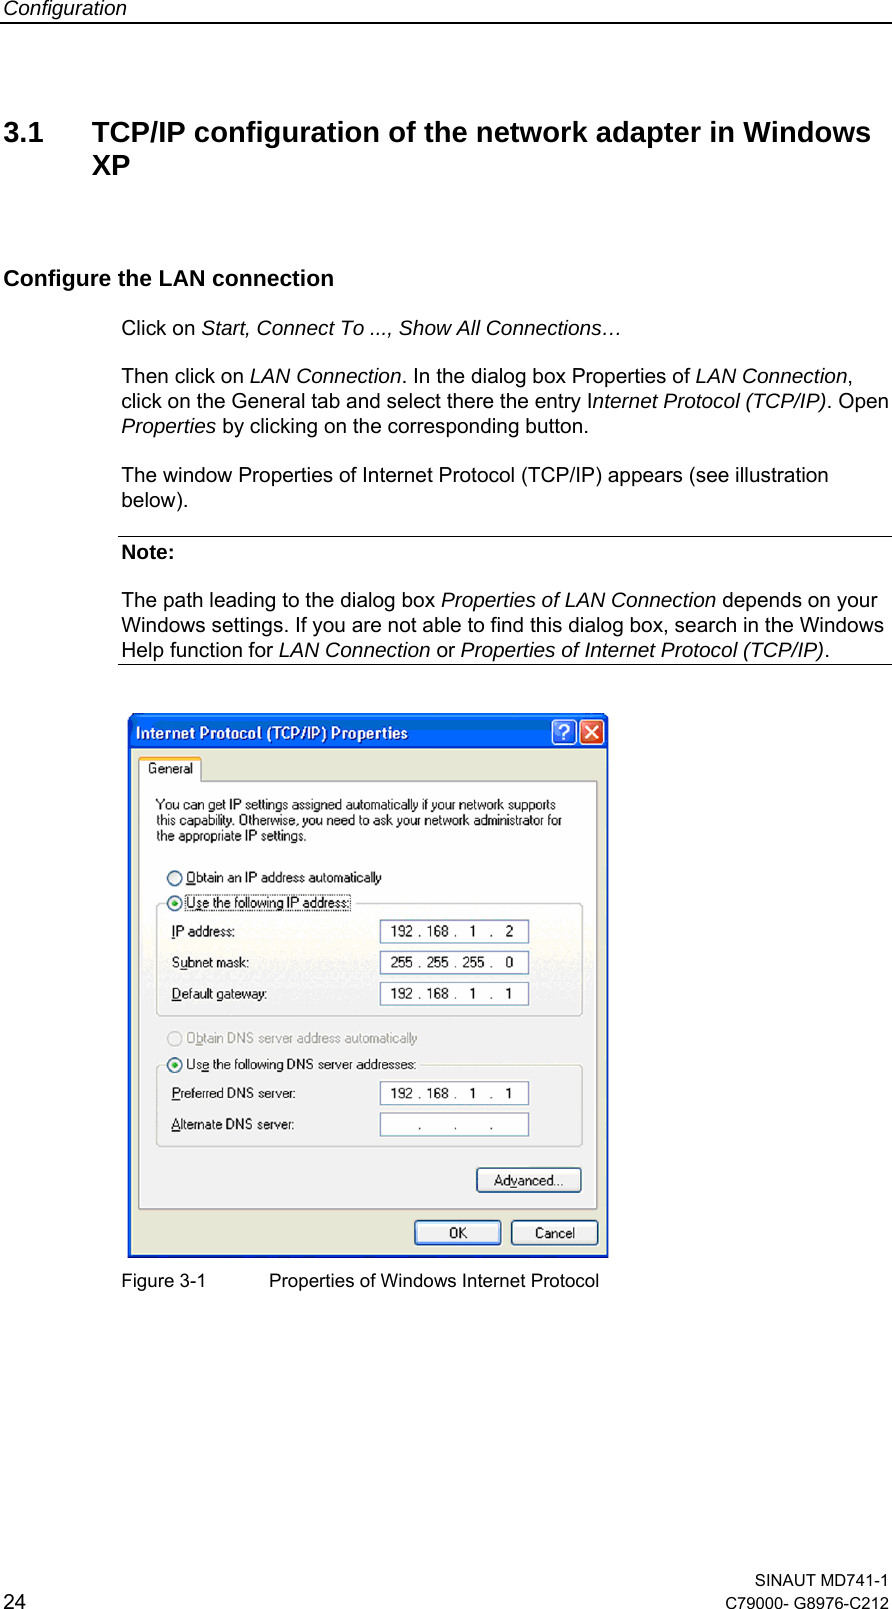 Configuration  SINAUT MD741-1 24  C79000- G8976-C212   3.1  TCP/IP configuration of the network adapter in Windows XP Configure the LAN connection Click on Start, Connect To ..., Show All Connections…  Then click on LAN Connection. In the dialog box Properties of LAN Connection, click on the General tab and select there the entry Internet Protocol (TCP/IP). Open Properties by clicking on the corresponding button. The window Properties of Internet Protocol (TCP/IP) appears (see illustration below). Note: The path leading to the dialog box Properties of LAN Connection depends on your Windows settings. If you are not able to find this dialog box, search in the Windows Help function for LAN Connection or Properties of Internet Protocol (TCP/IP).     Figure 3-1  Properties of Windows Internet Protocol    